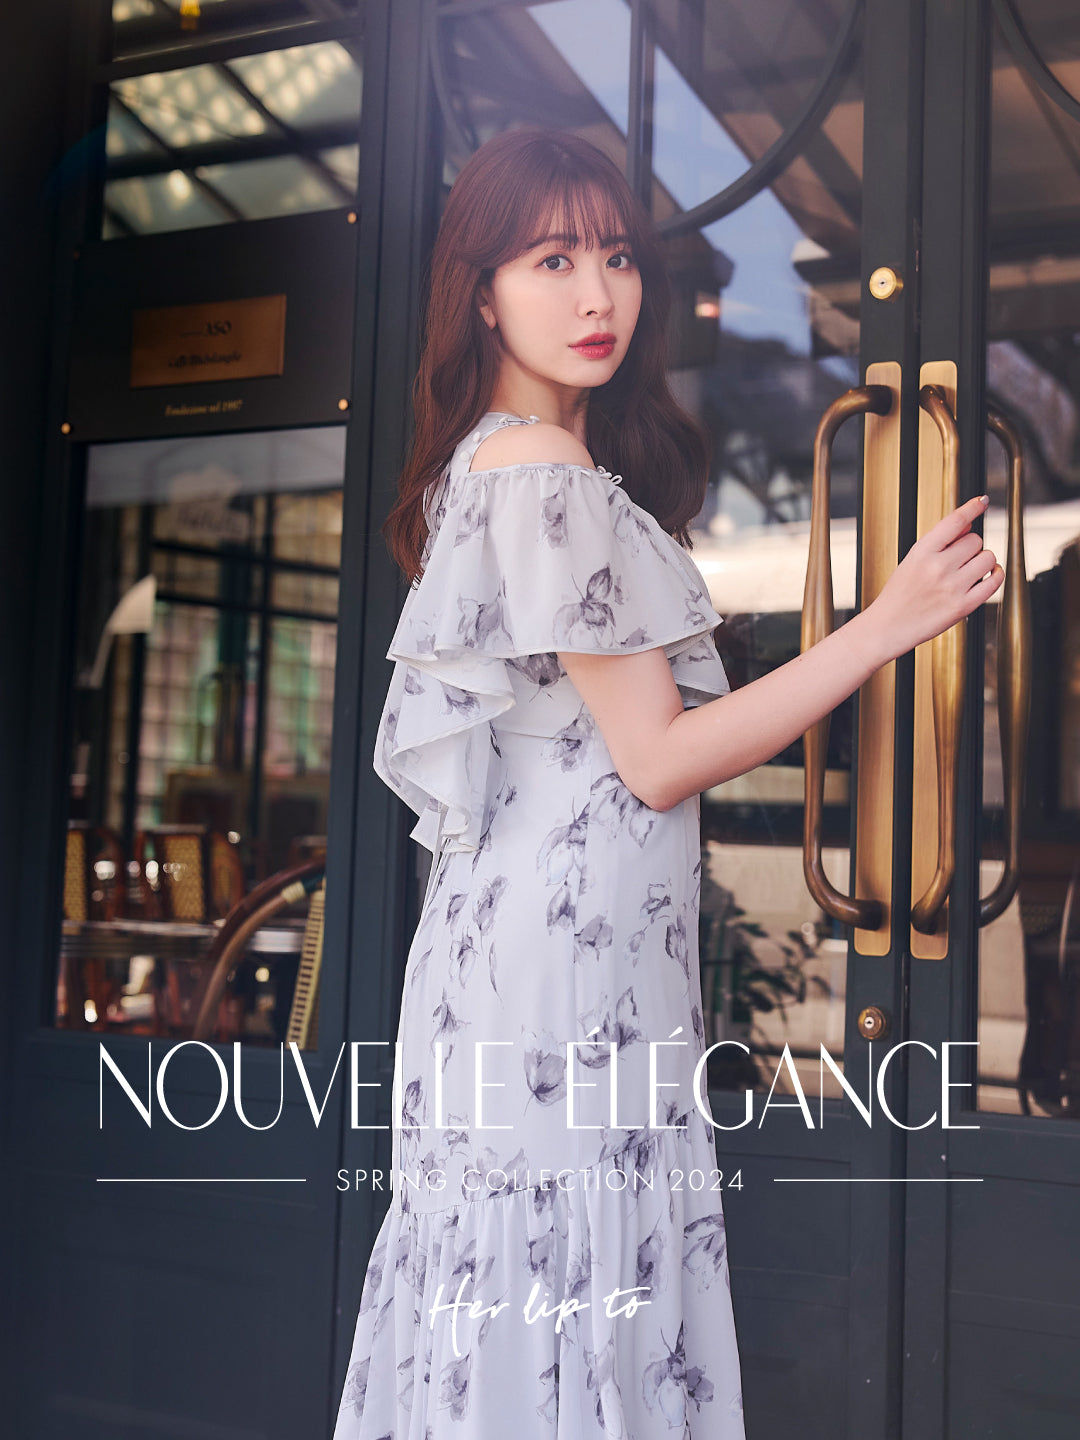 NOUVELLE ÉLÉGANCE-SPRING COLLECTION 2024- Coming to you on 4.21